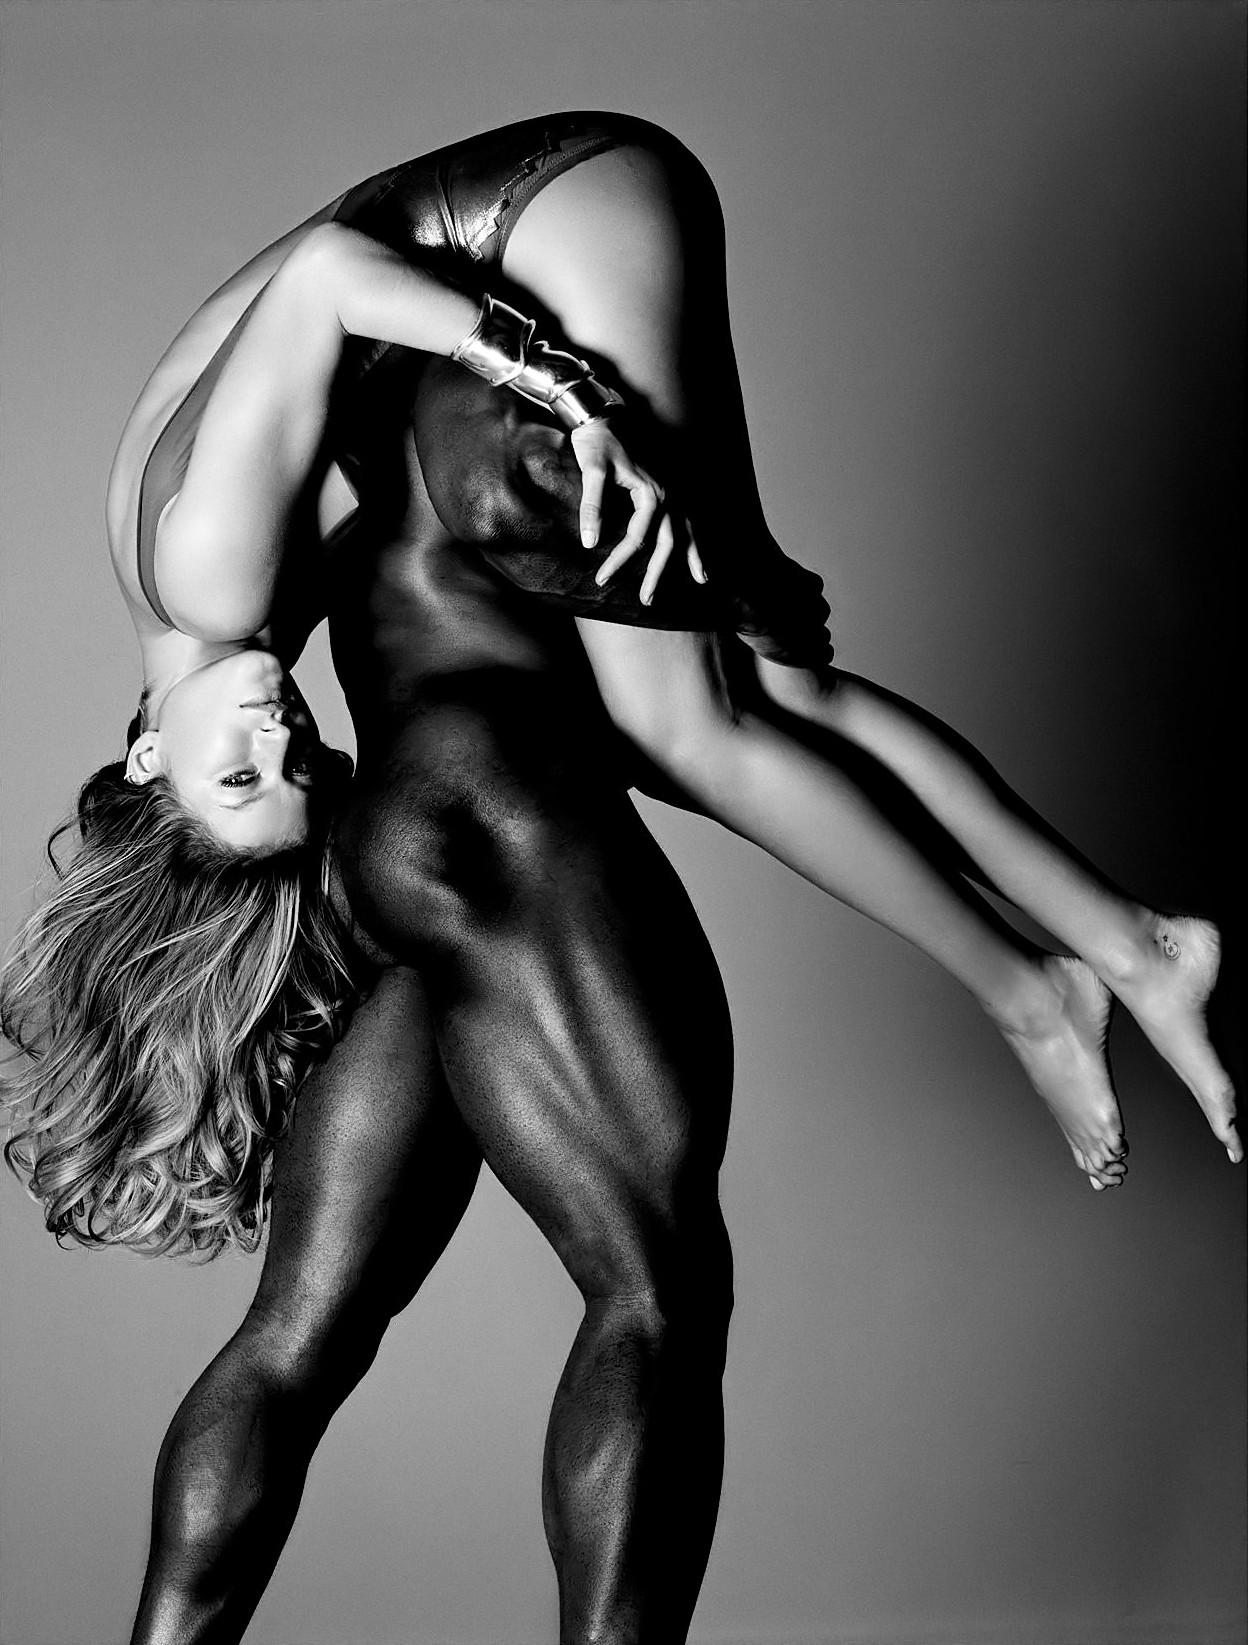 gisele bundchen being carried by nude man